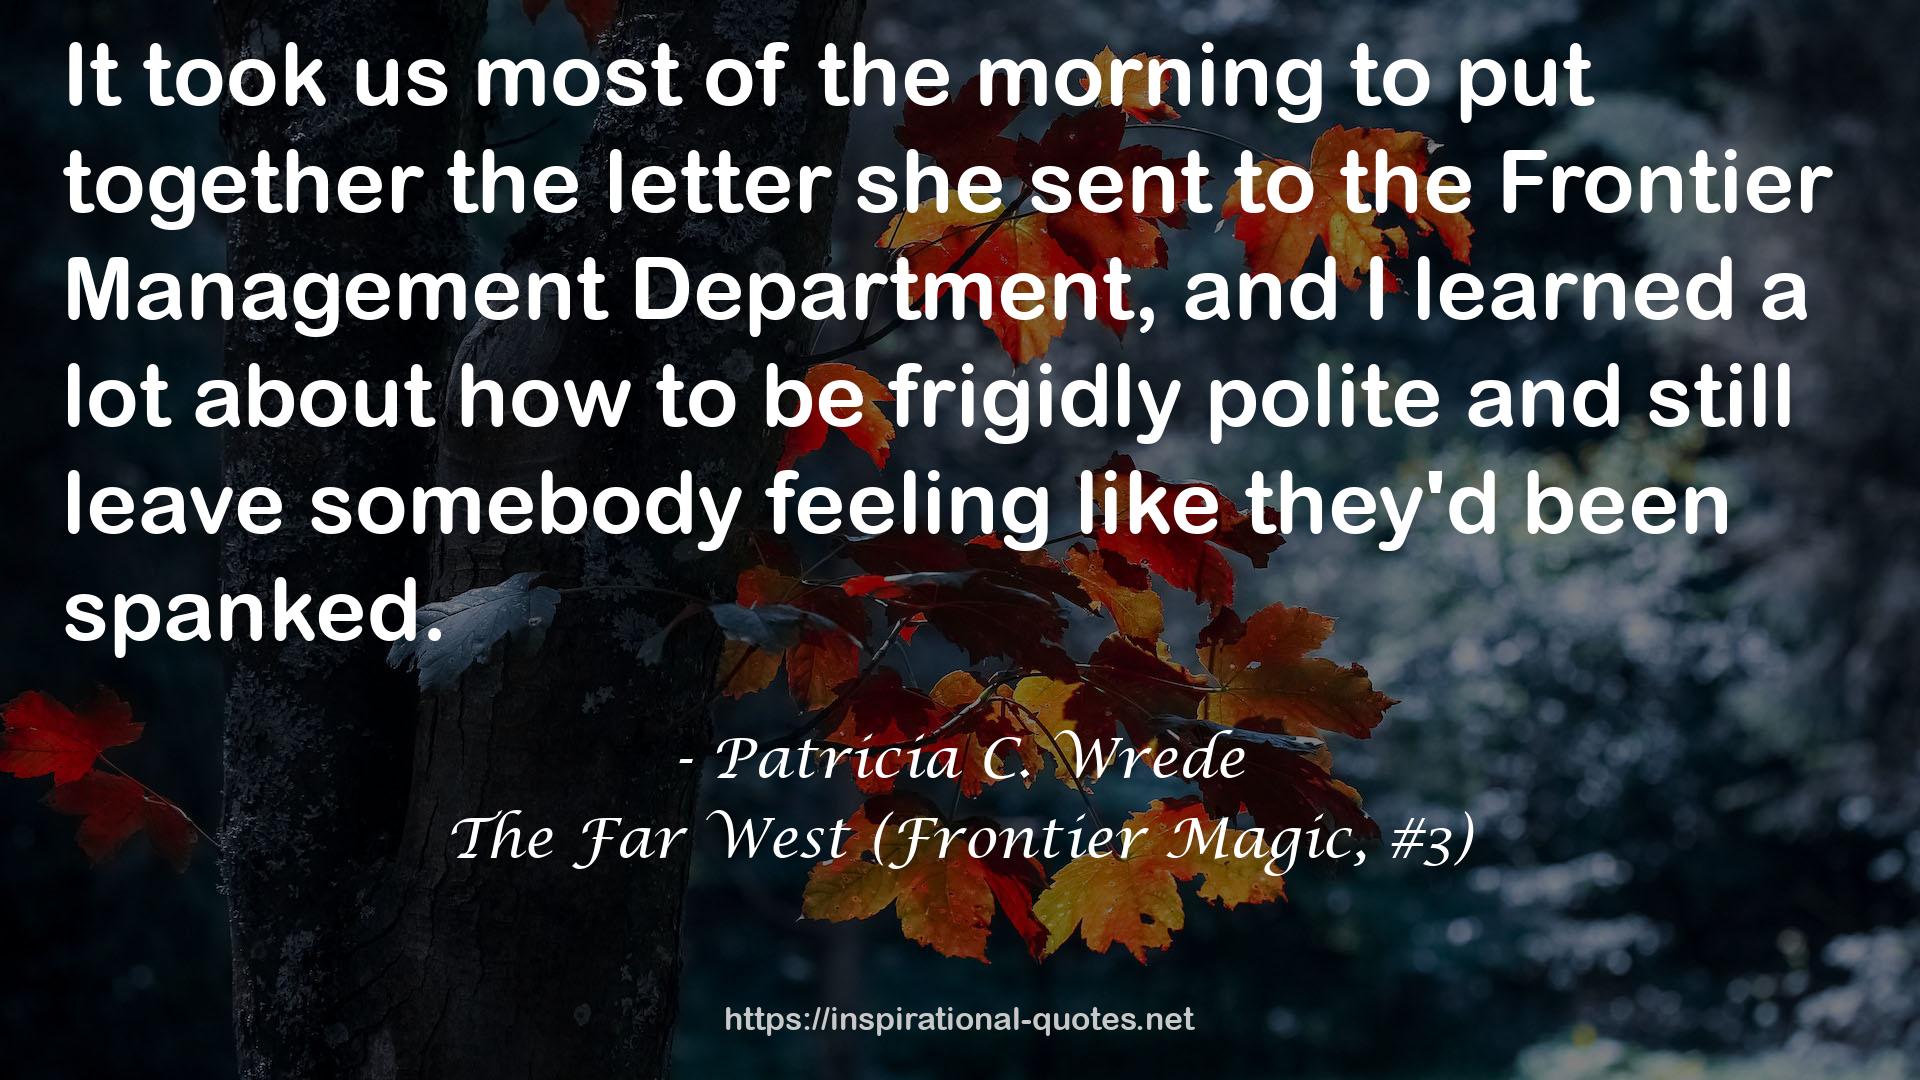 The Far West (Frontier Magic, #3) QUOTES